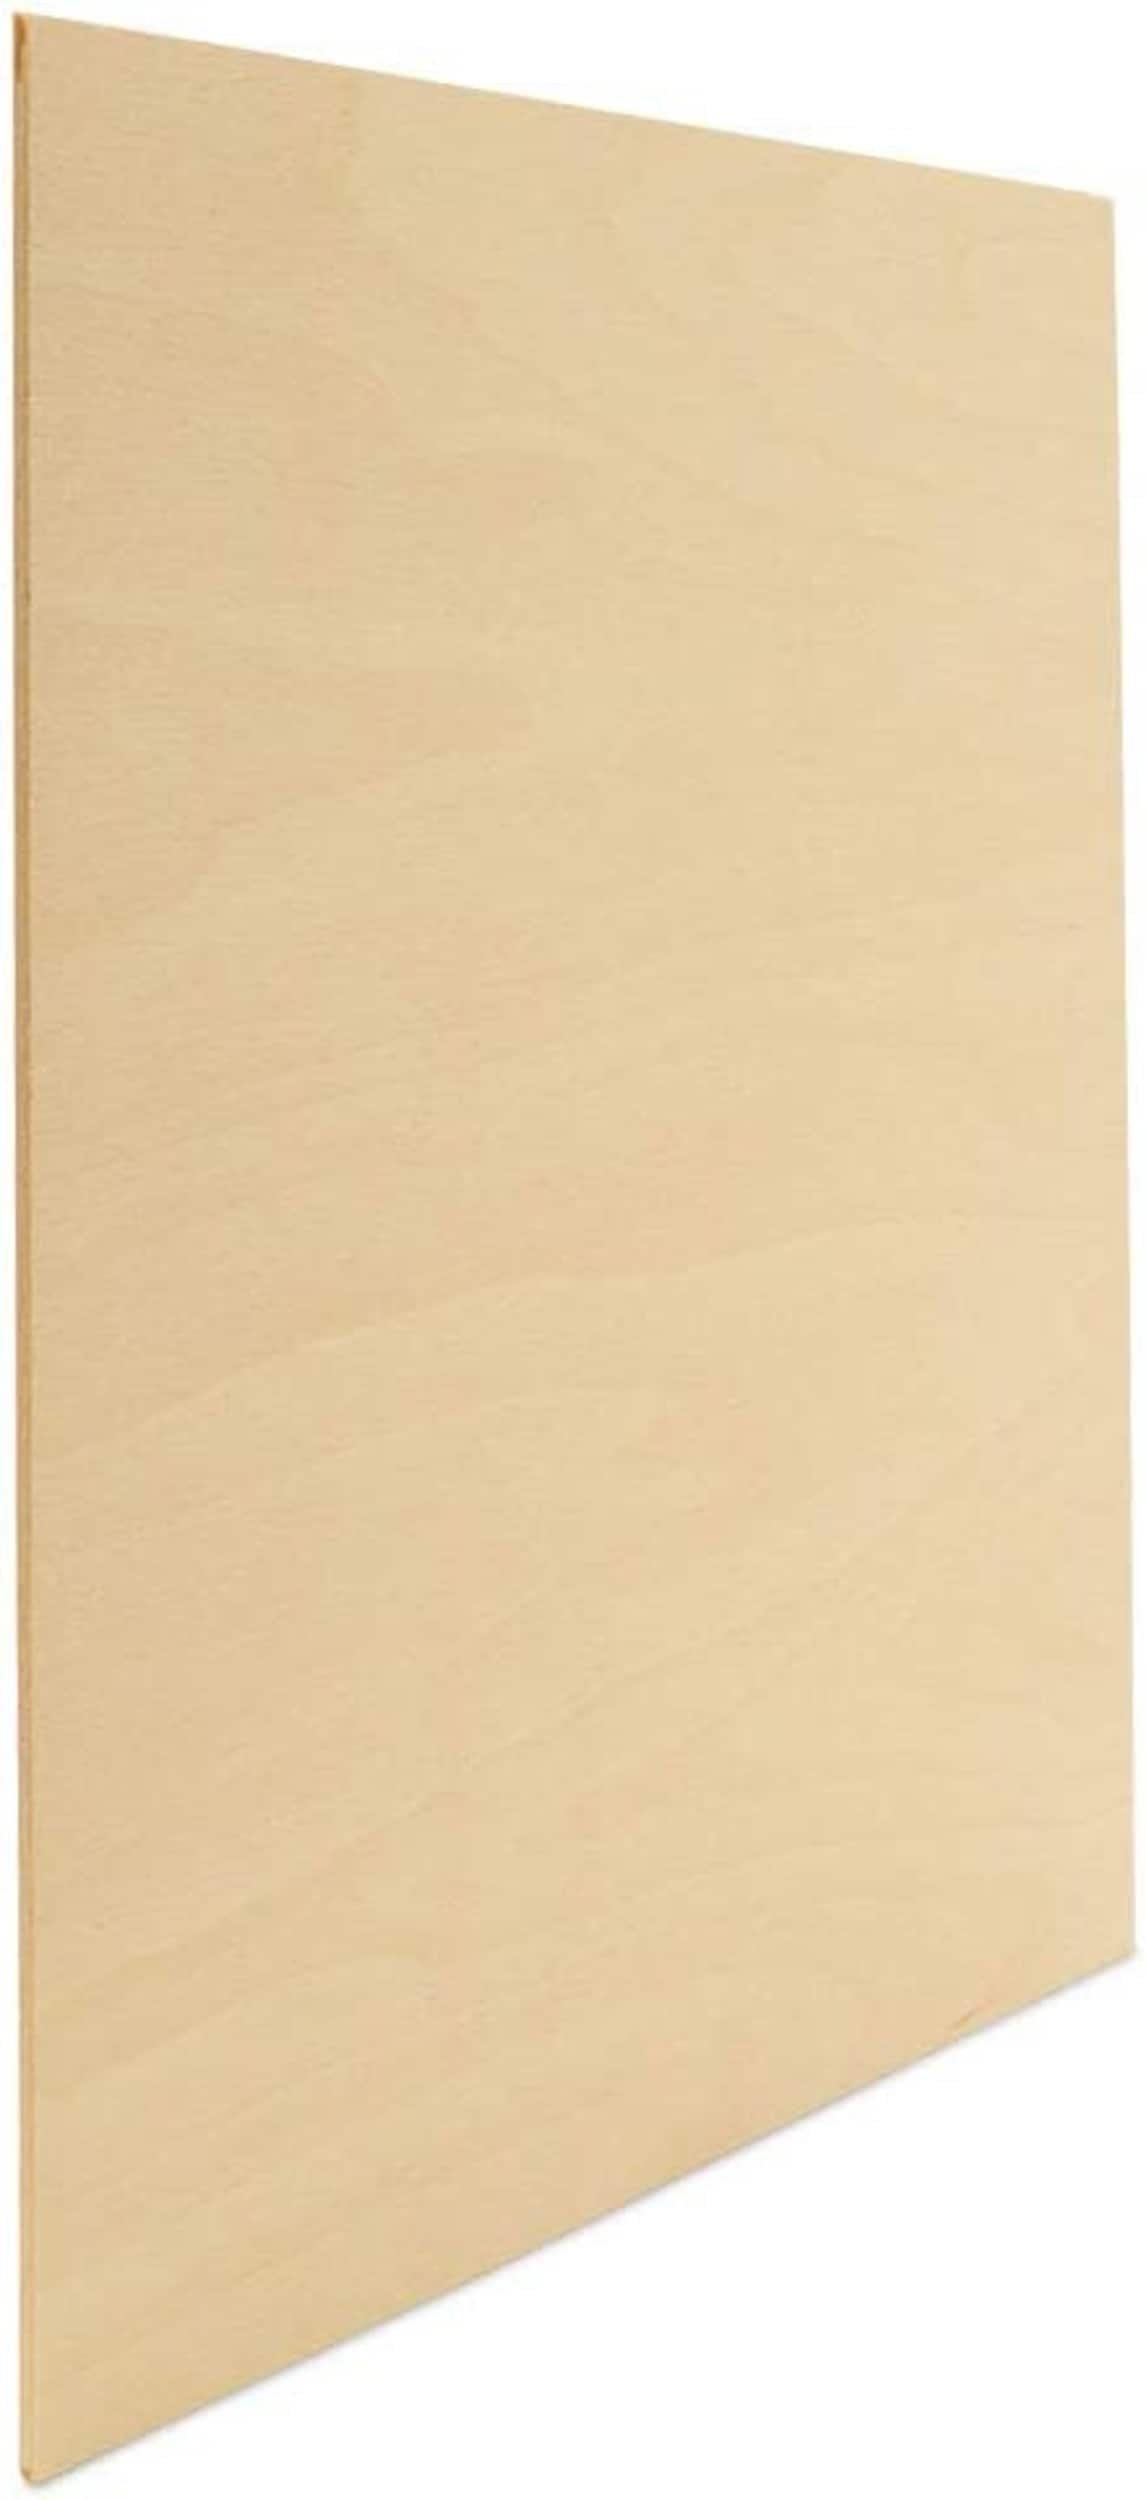 Baltic Birch Plywood, 3 mm 1/8 x 12 x 9 Inch Craft Wood, Box of 45 B/BB  Grade Baltic Birch Sheets, Perfect for Laser, CNC Cutting and Wood Burning,  by Woodpeckers 